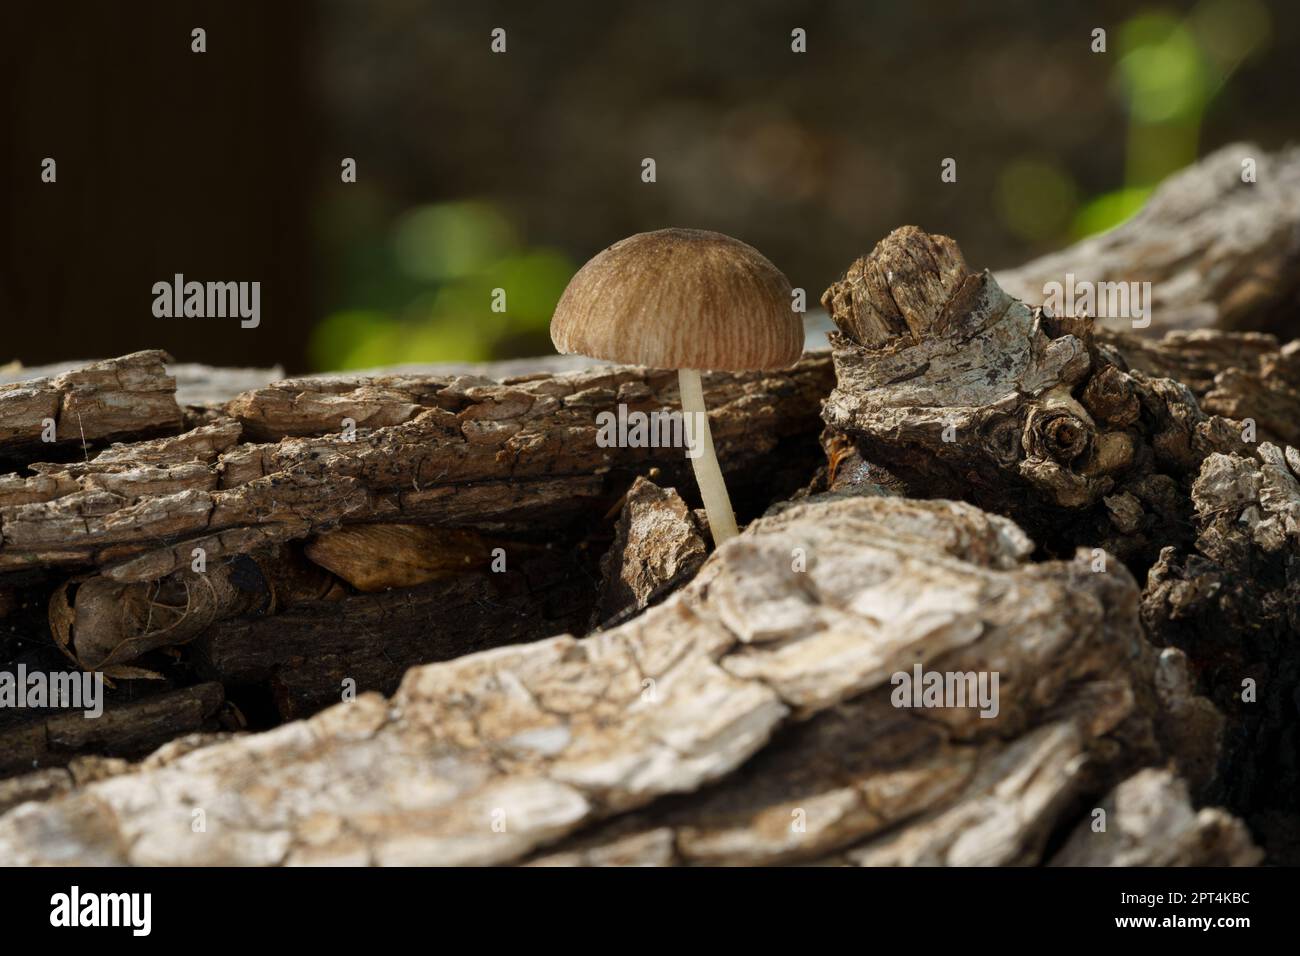 Tiny mushroom growing out of a rotting log, returning nutrients to the soil. Stock Photo